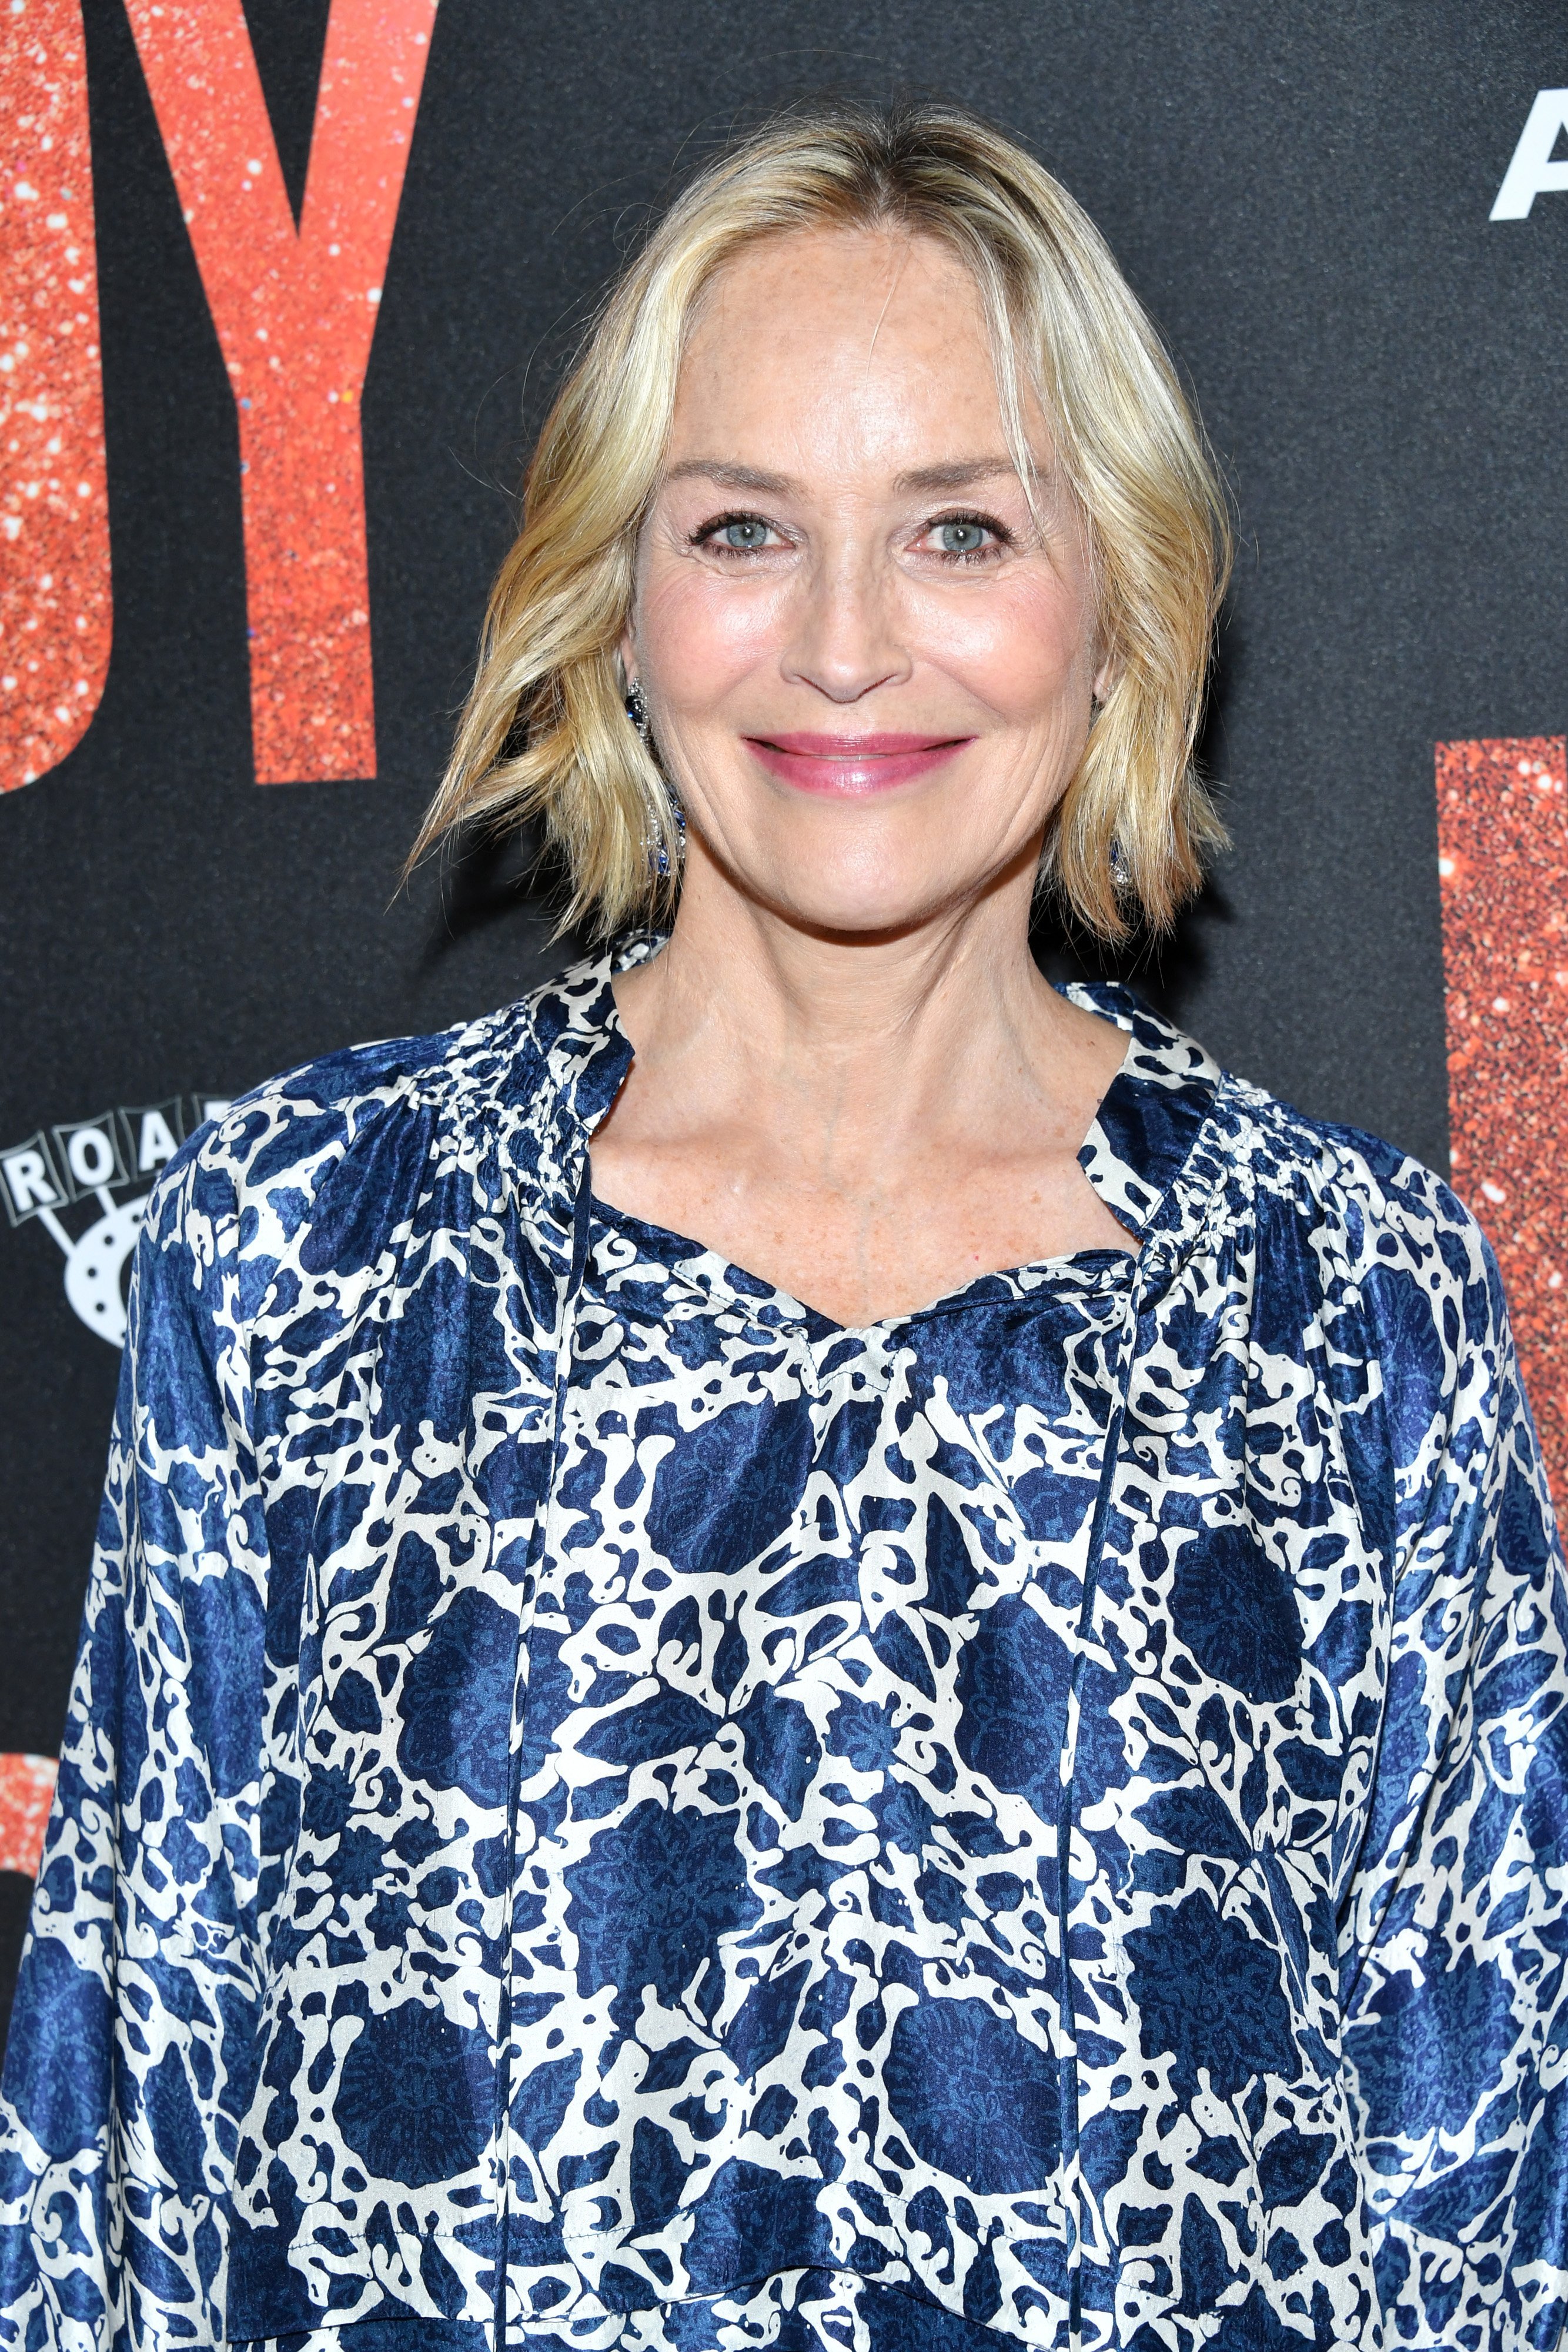 Sharon Stone attends the LA premiere of Roadside Attraction's "Judy" at Samuel Goldwyn Theater on September 19, 2019, in Beverly Hills, California. | Source: Getty Images.